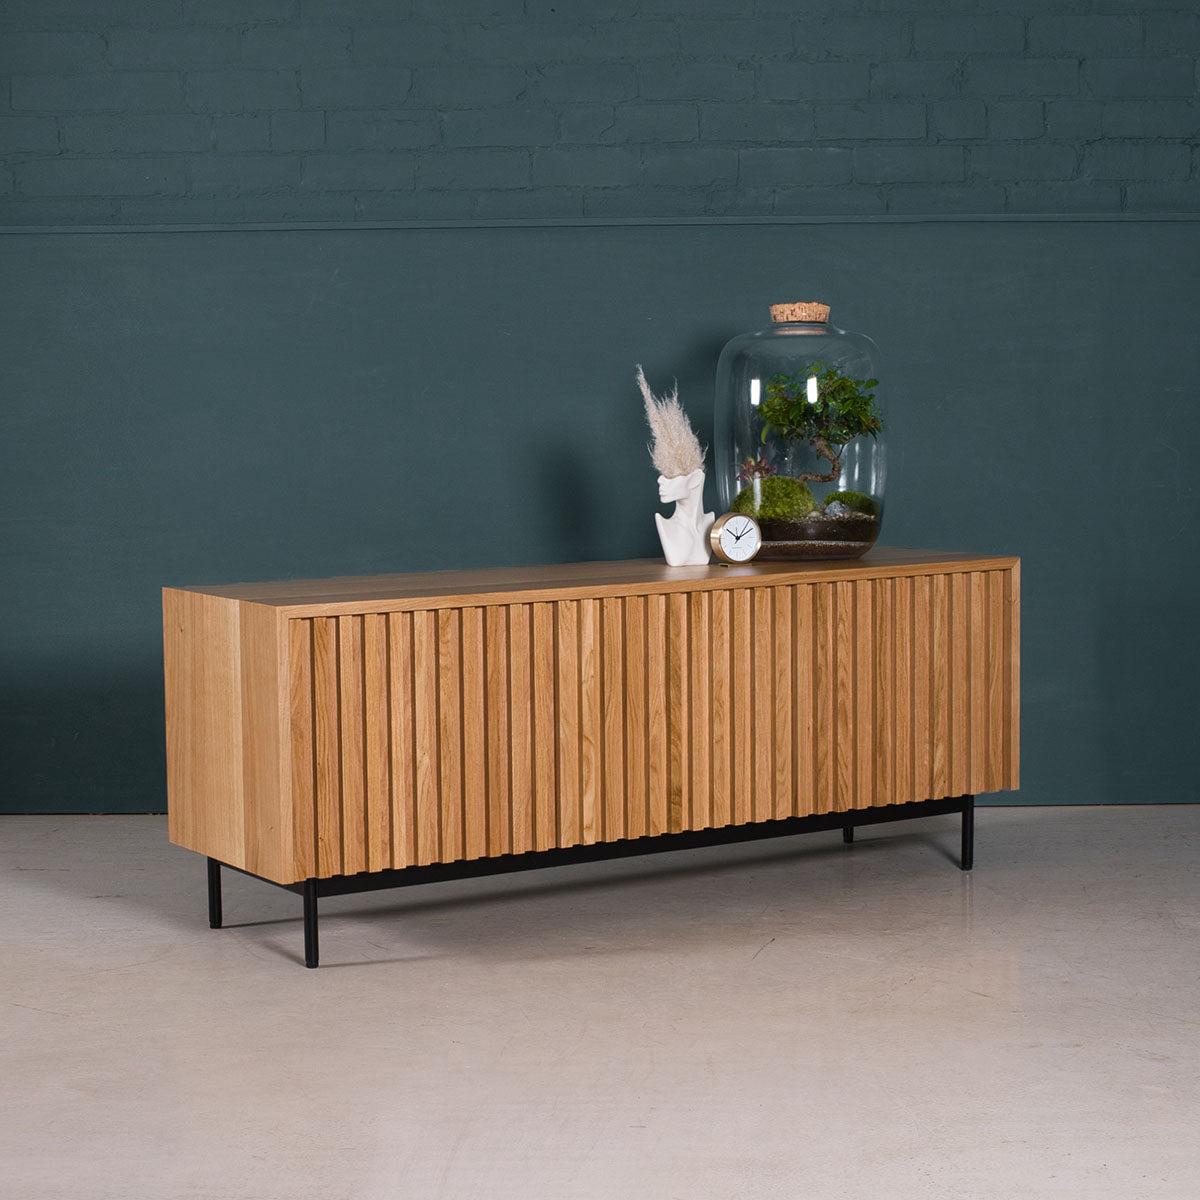 An image of the Fluted Oak Cabinet product available from Koda Studios